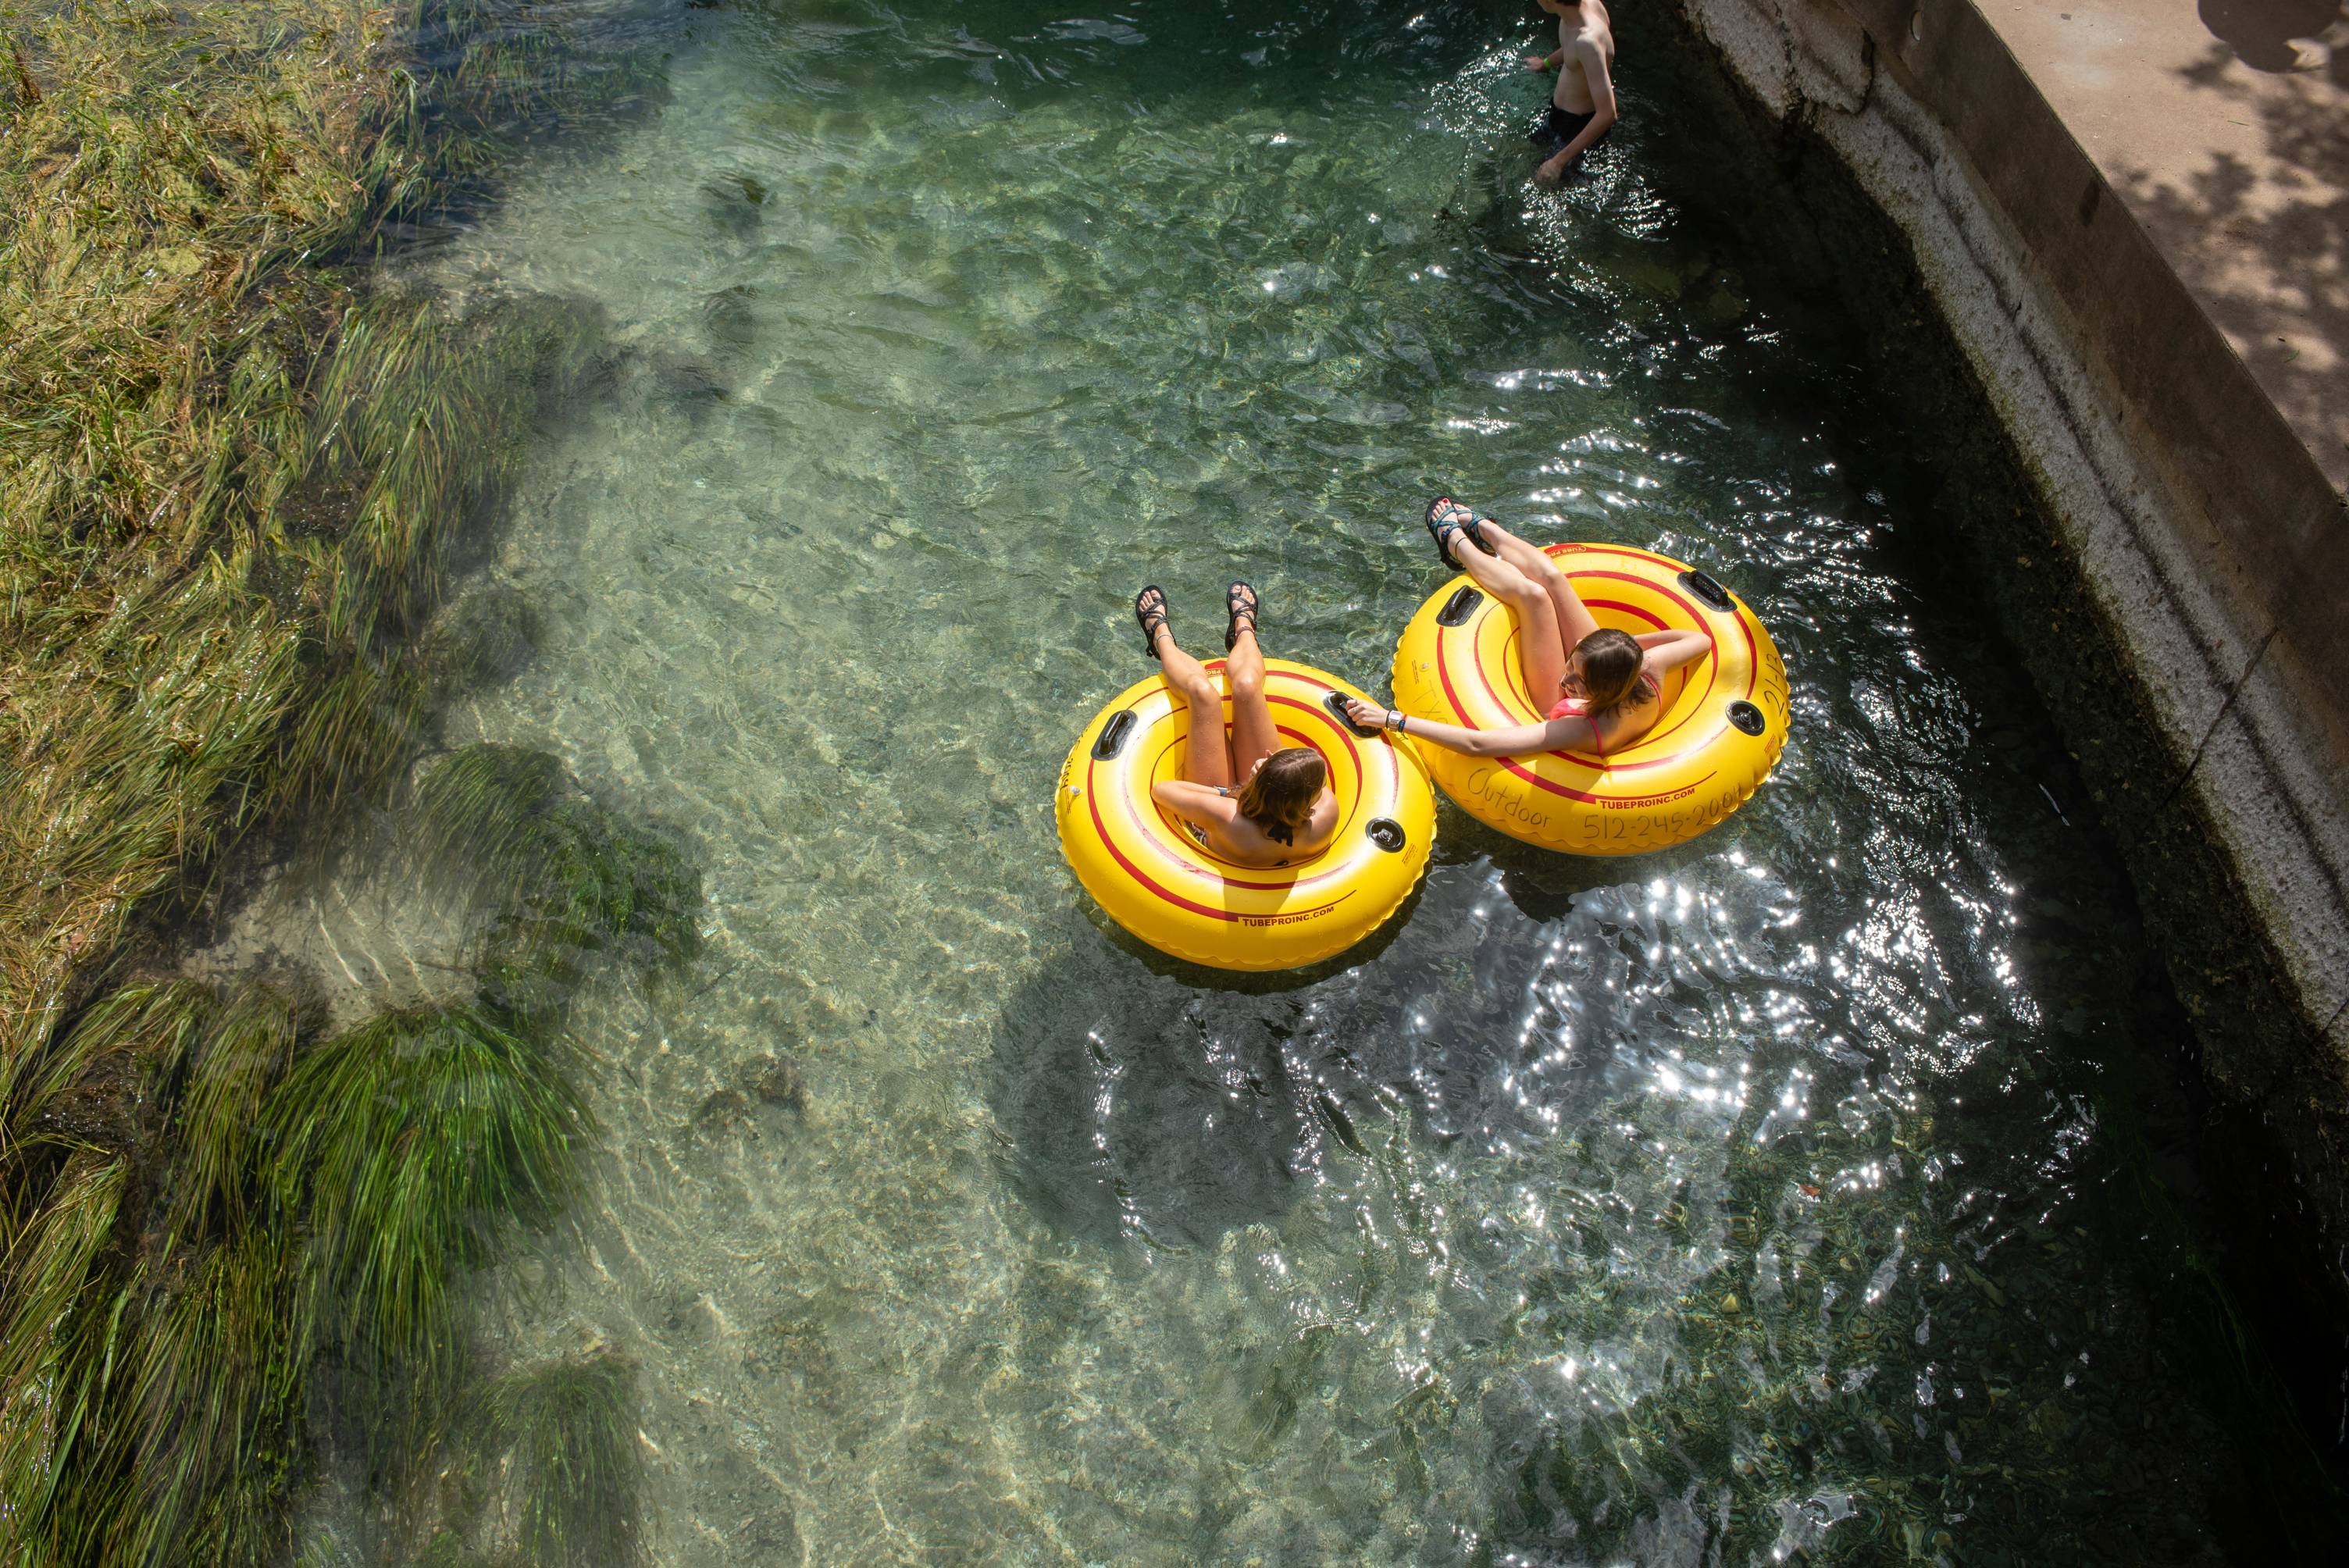 Students tubing down the San Marcos River